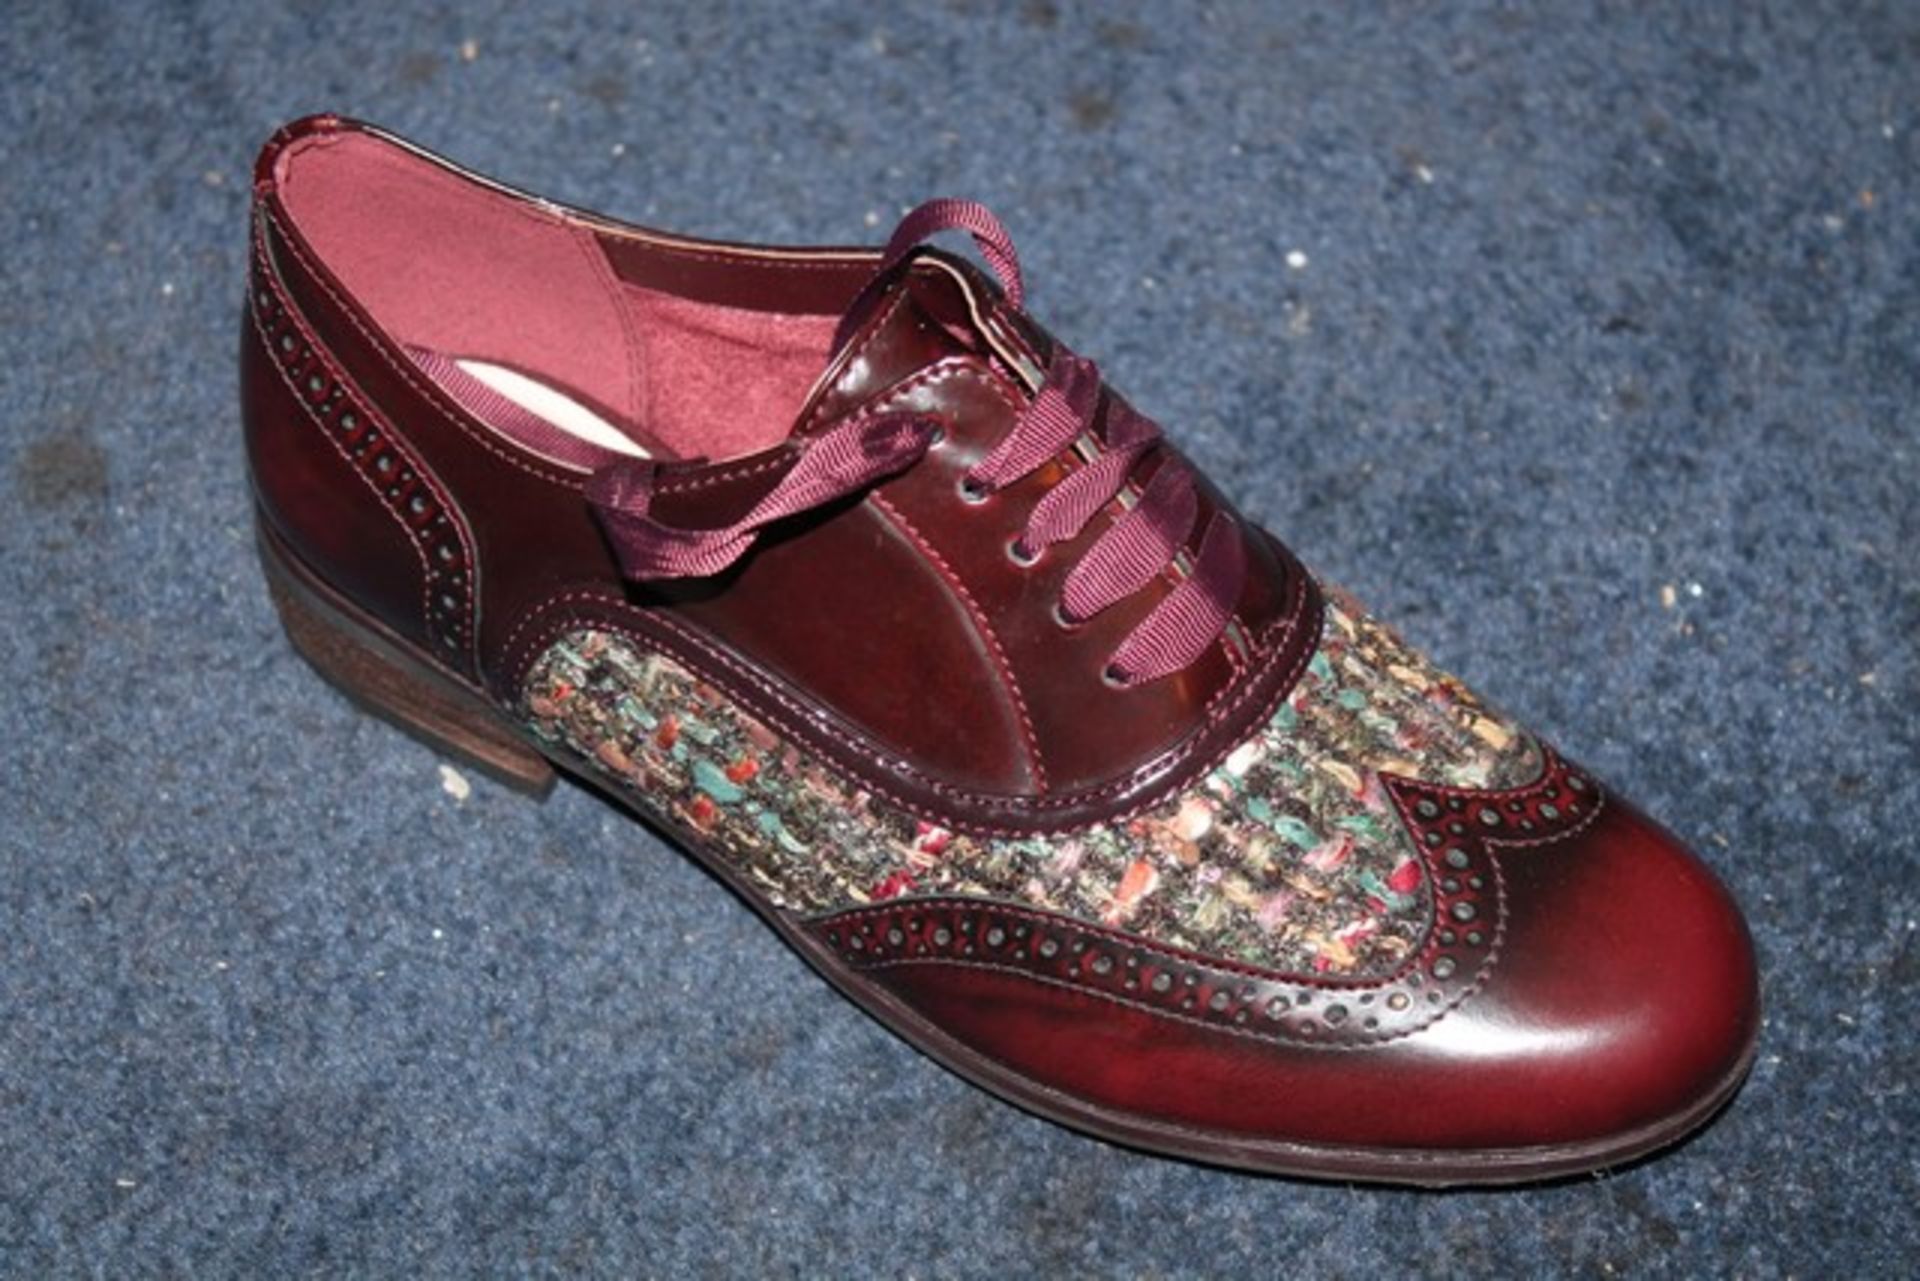 1 x BOXED PAIR OF OX BLOOD LEATHER SHOES IN A UK 5 (20/1/2015)  *PLEASE NOTE THAT THE BID PRICE IS